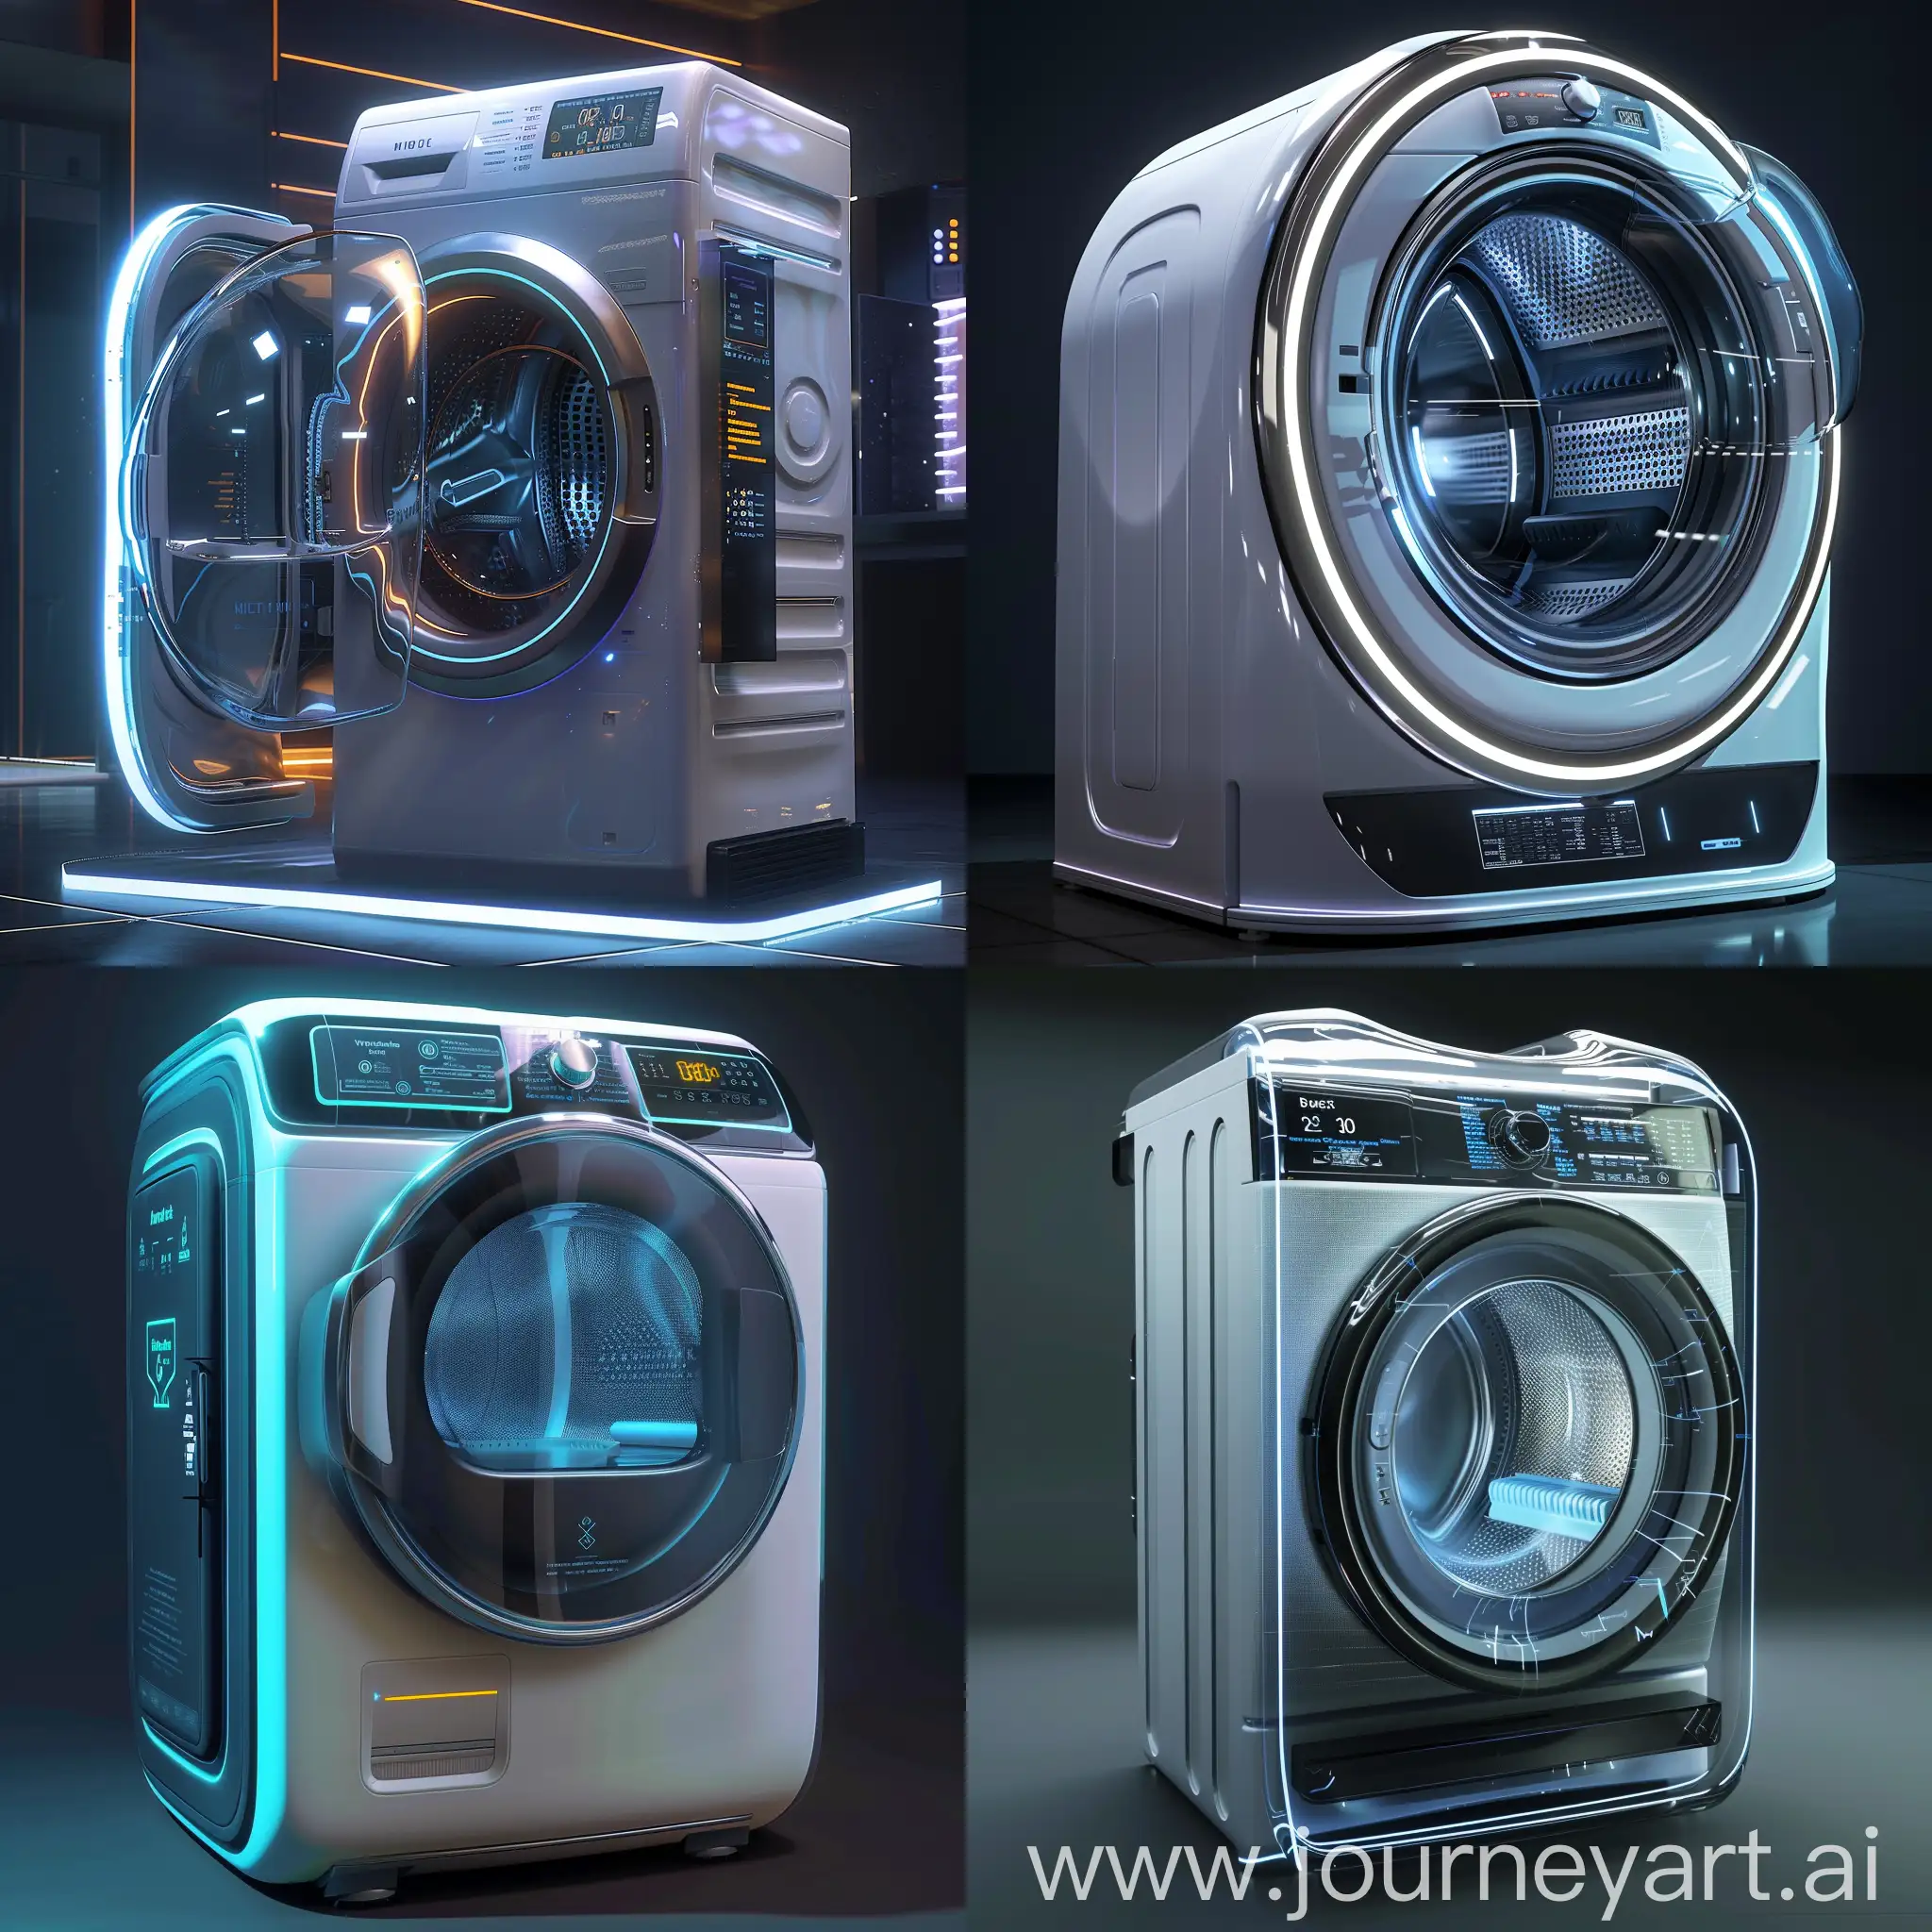 Futuristic-Washing-Machine-with-Advanced-Water-Recycling-and-AIPowered-Technology